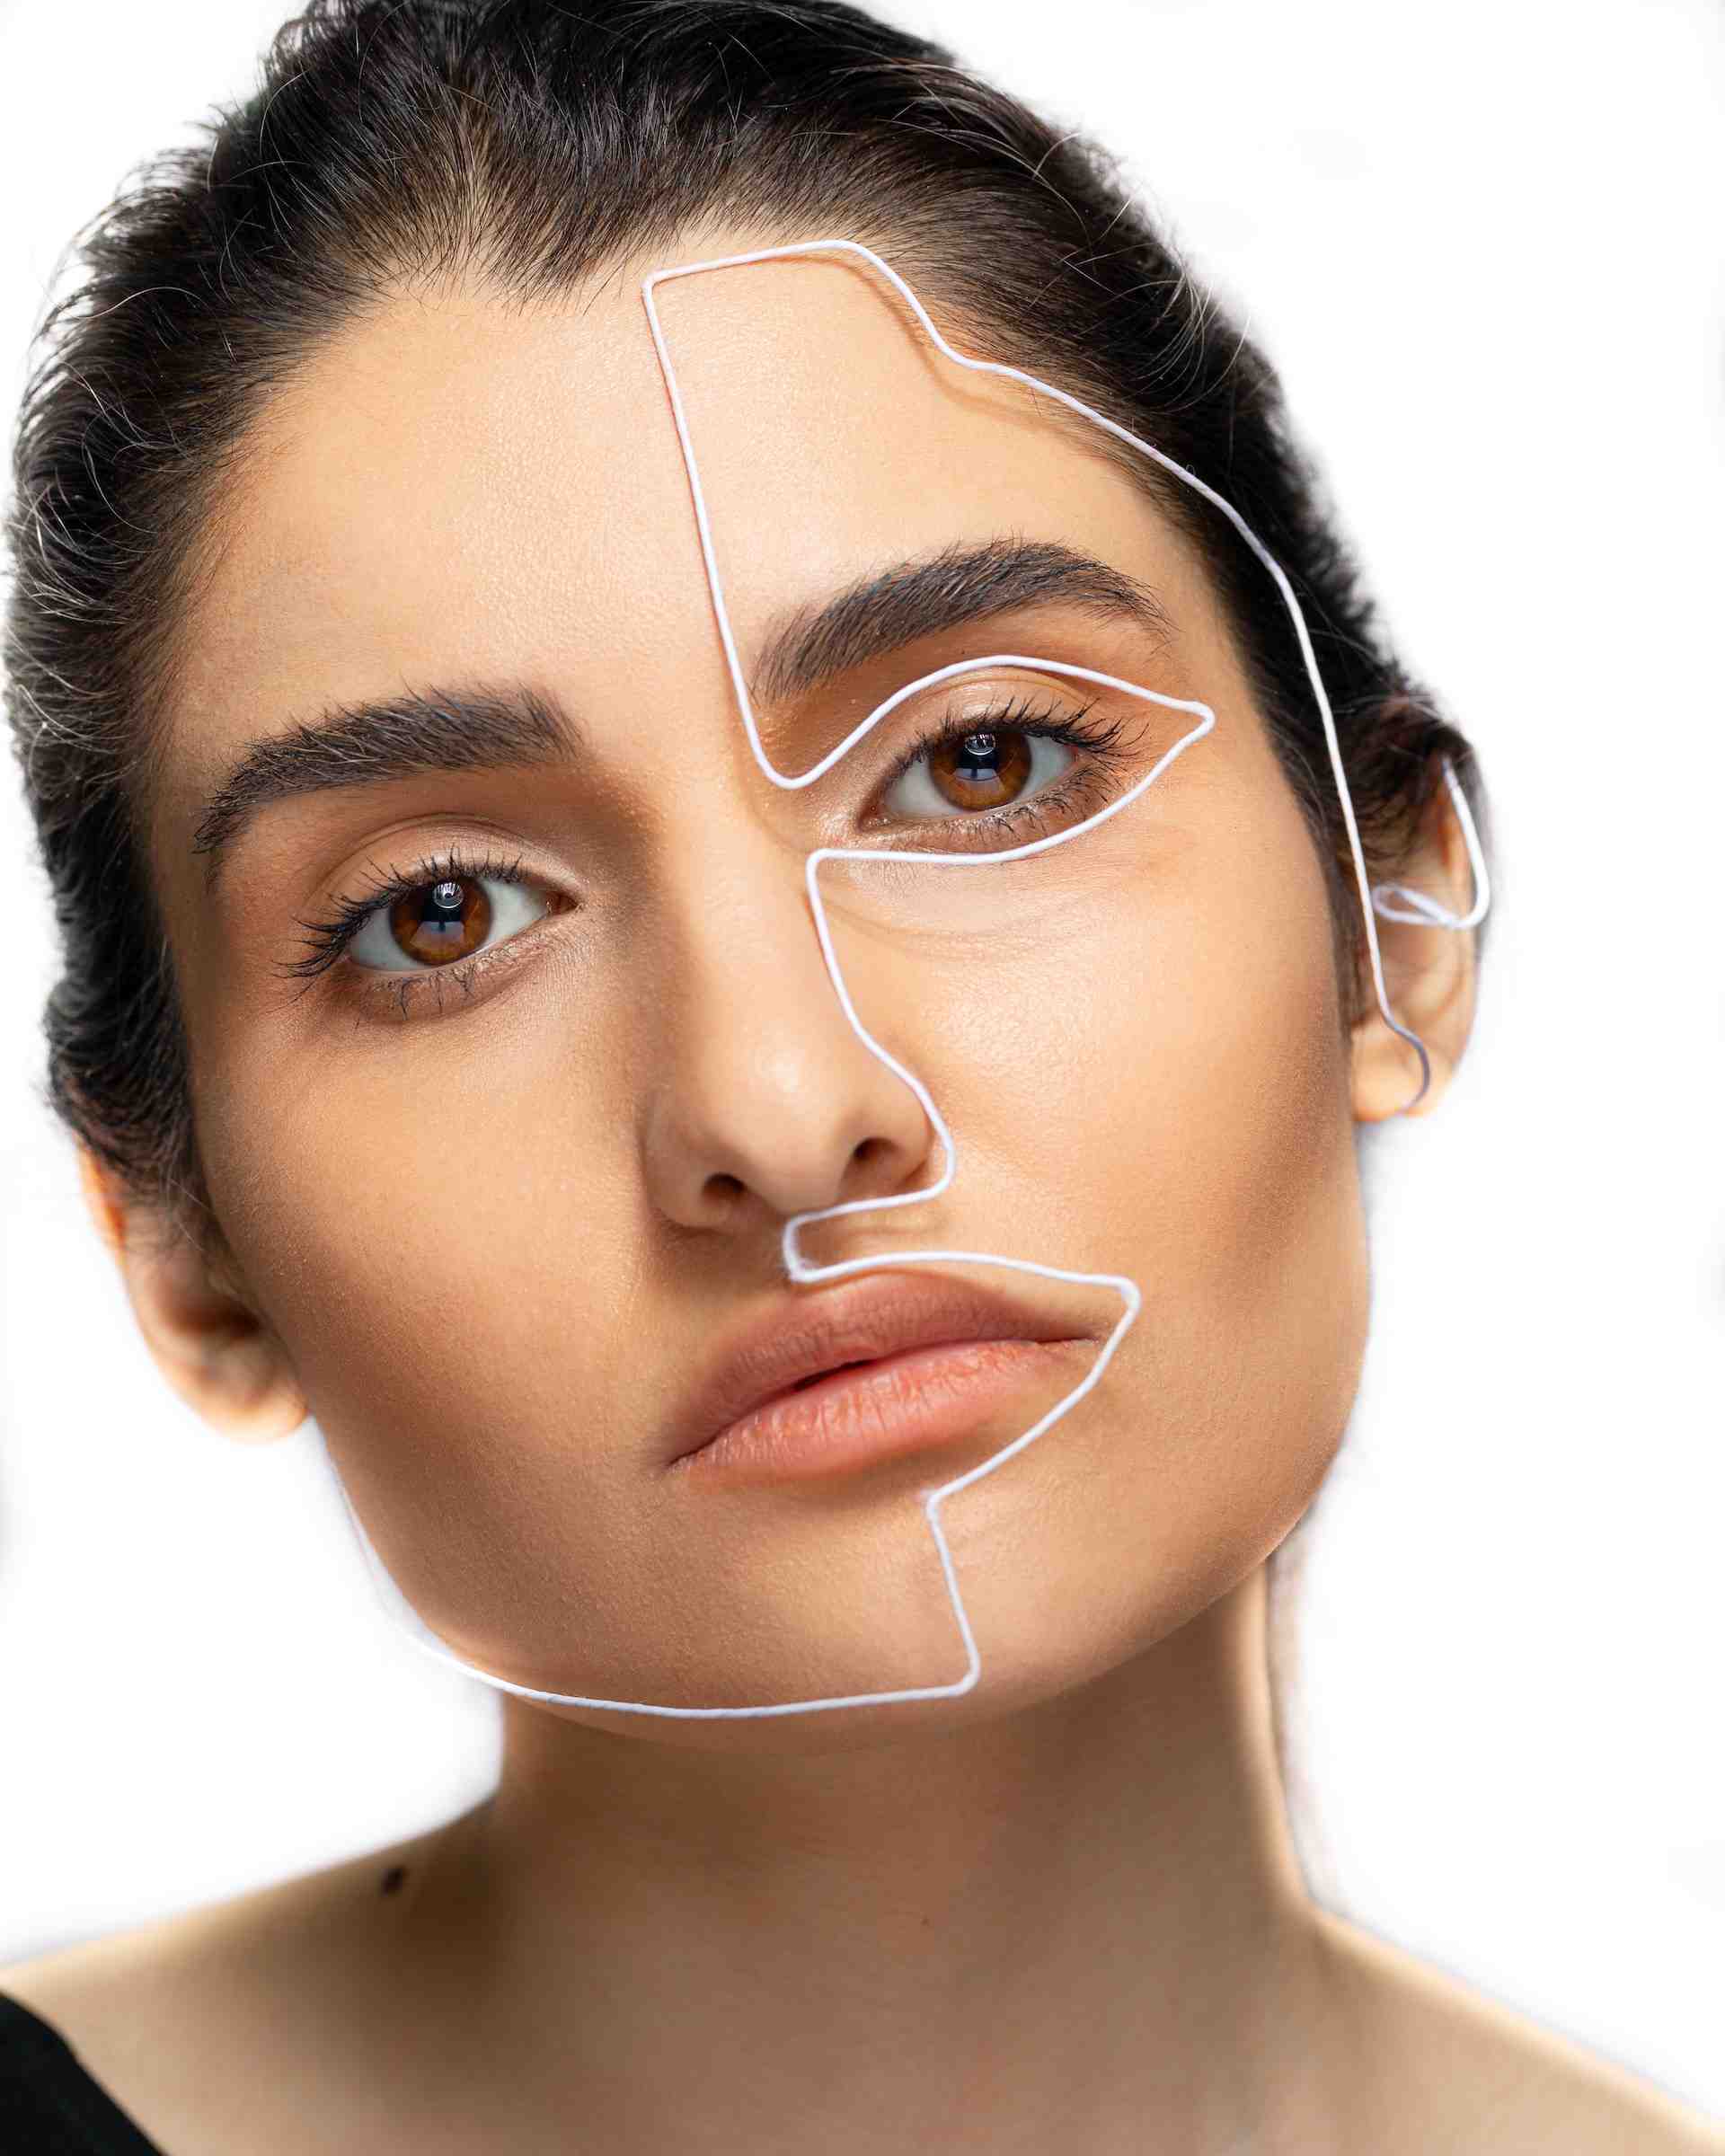 Deep Plane Facelift A Comprehensive Guide to the Procedure